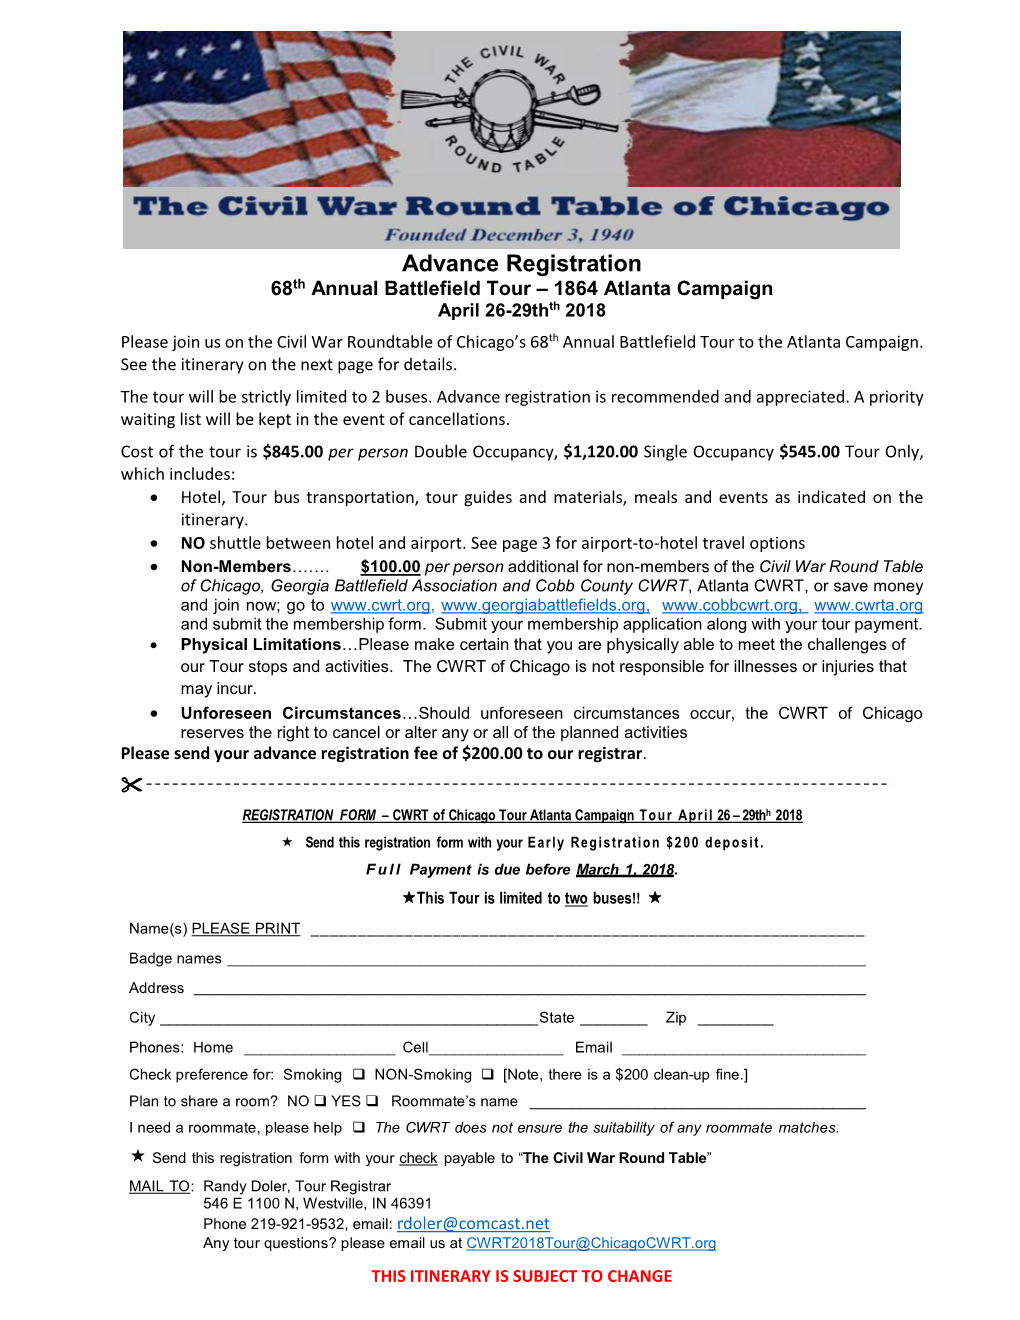 1864 Atlanta Campaign April 26-29Thth 2018 Please Join Us on the Civil War Roundtable of Chicago’S 68Th Annual Battlefield Tour to the Atlanta Campaign